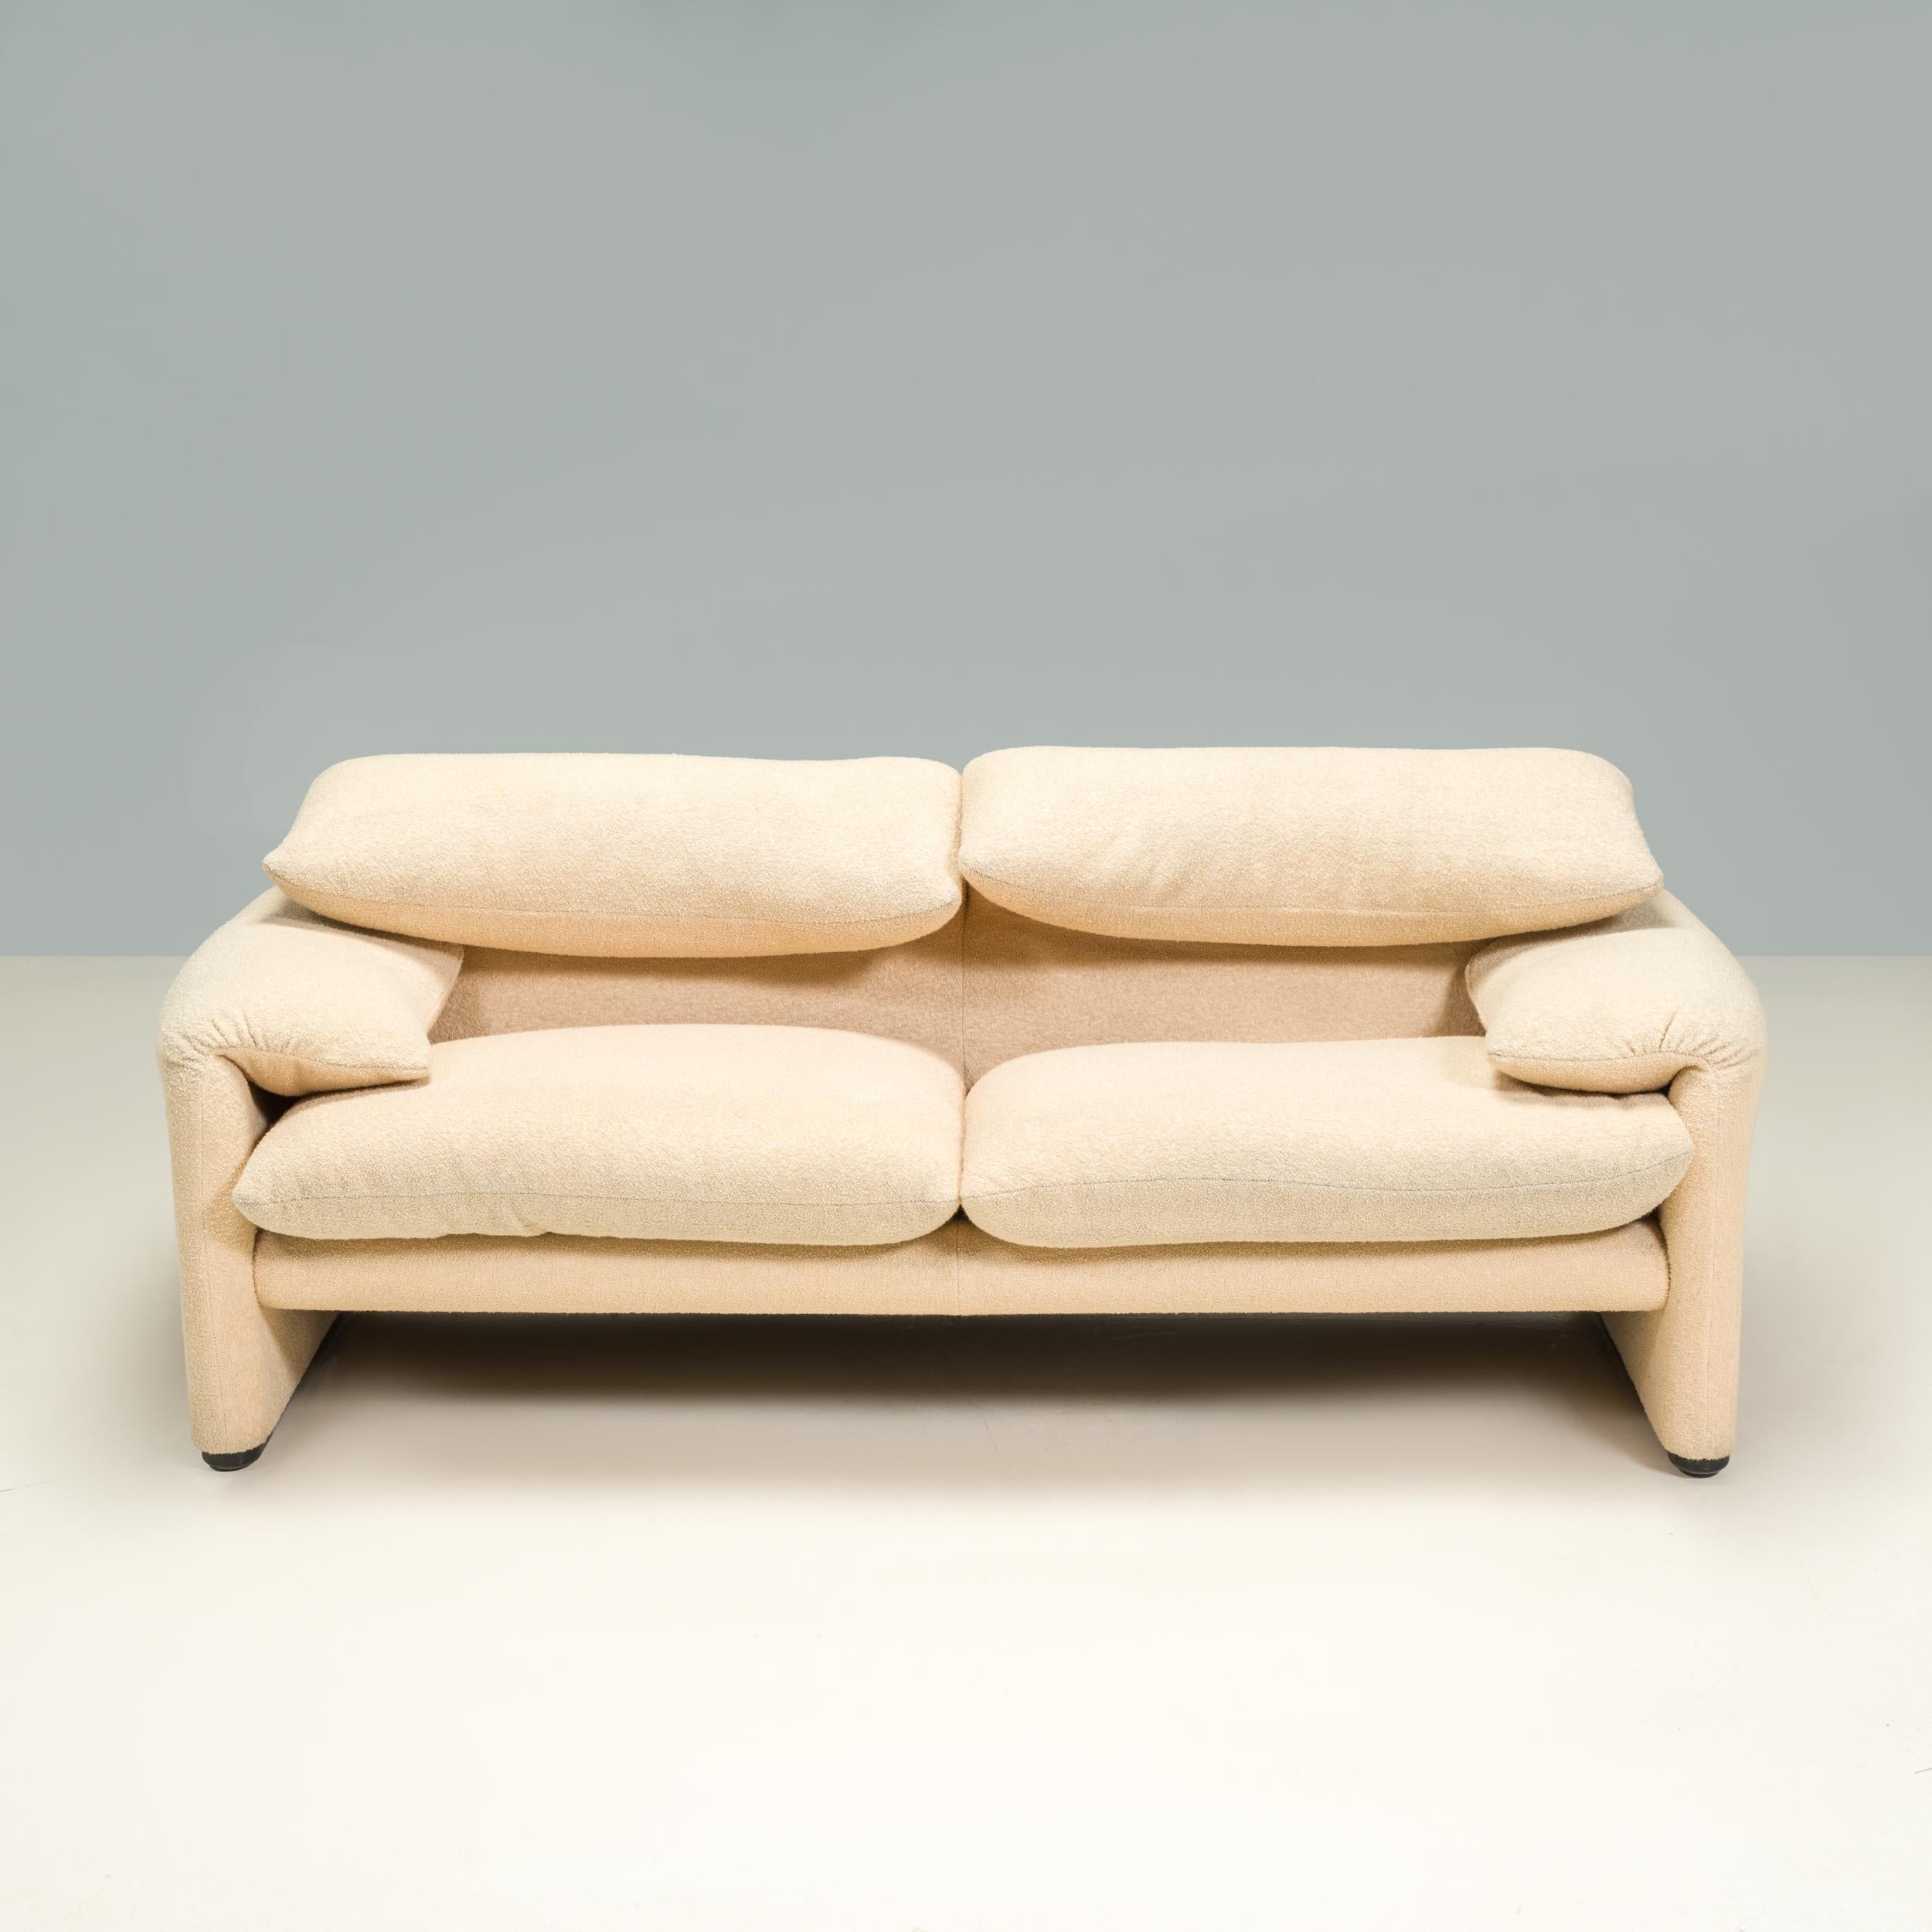 Originally designed by Vico Magistretti for Cassina in 1973, the Maralunga sofa has become a true design icon.

Upholstered in soft textured cream boucle fabric, the sofa features the signature adjustable headrests and folded armrests, while two